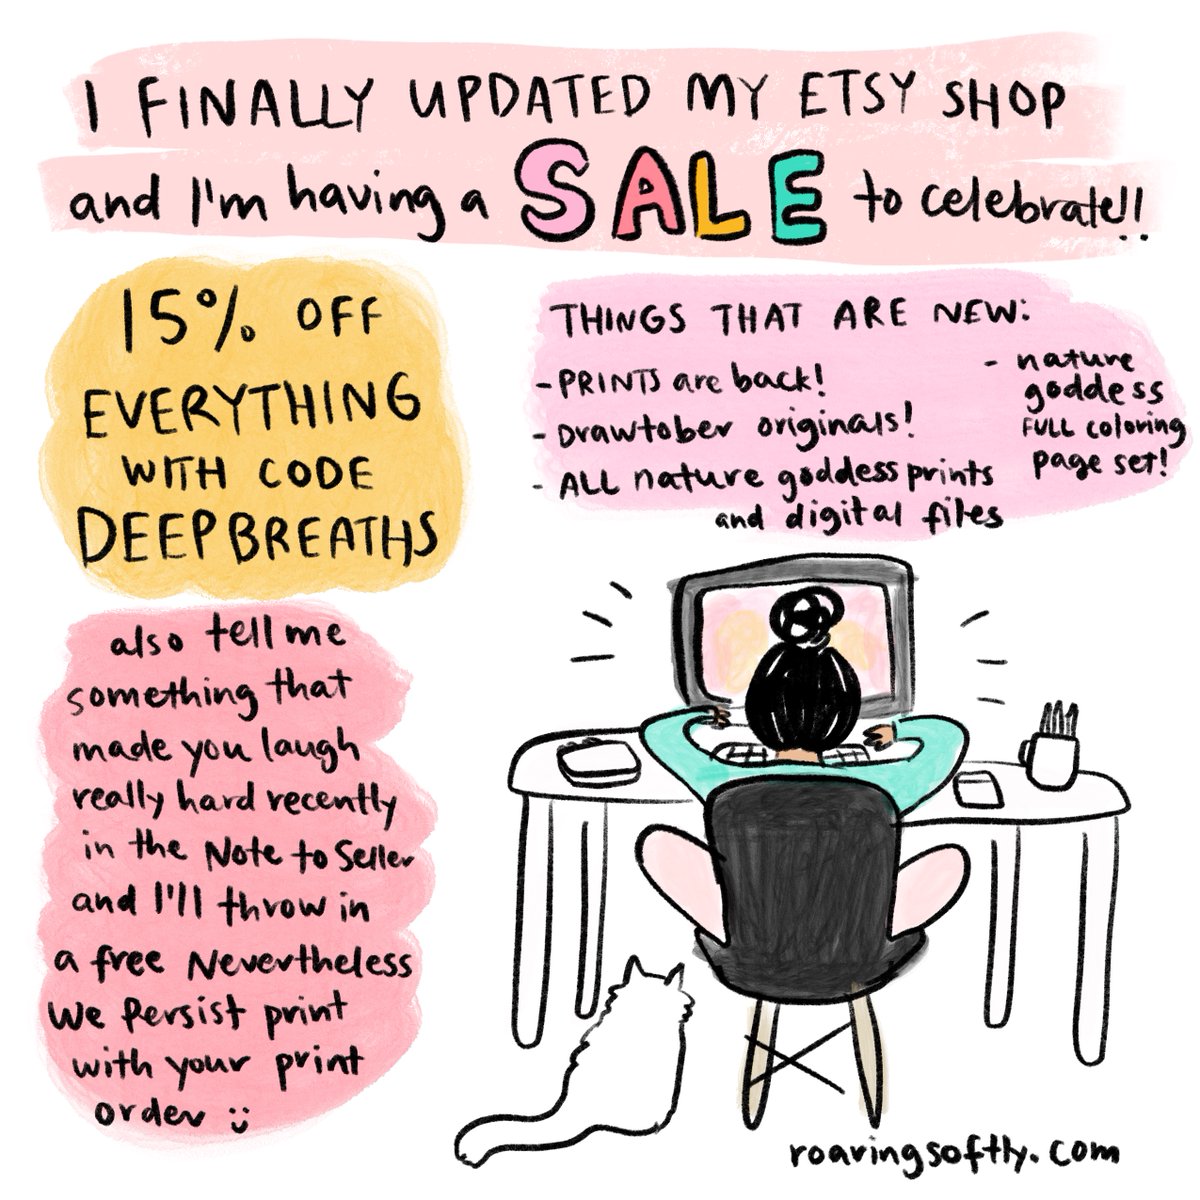 I updated my etsy shop with a buncha new stuff so I'm having a sale to celebrate! Get 15% off everything with code DEEPBREATHS + tell me something that made you laugh recently in the Note to Seller and I'll throw in a bonus print with your print order ? https://t.co/E7RWQbpMUa 